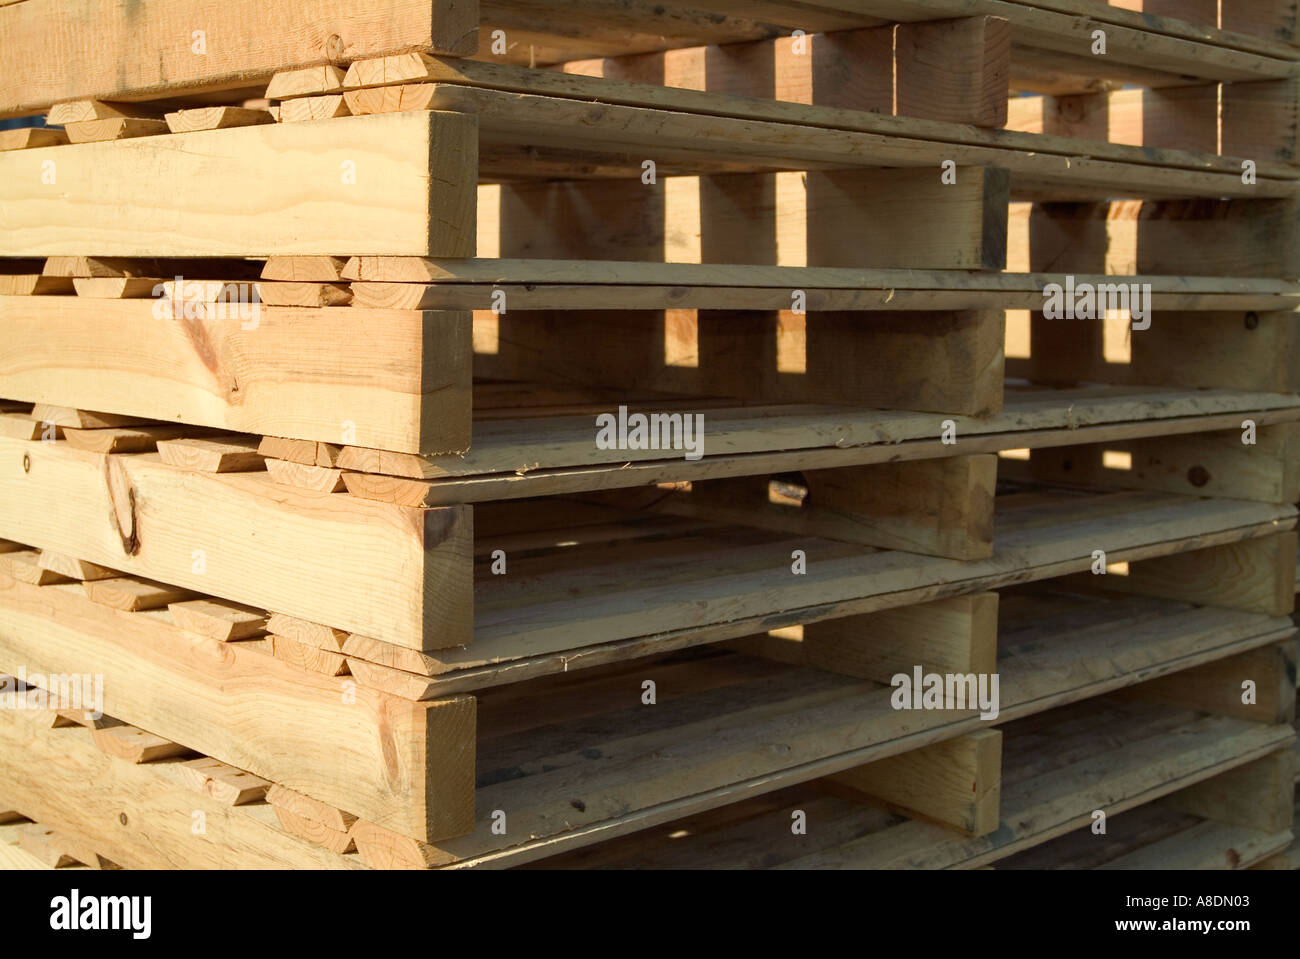 a stack of wooden shipping pallets Stock Photo